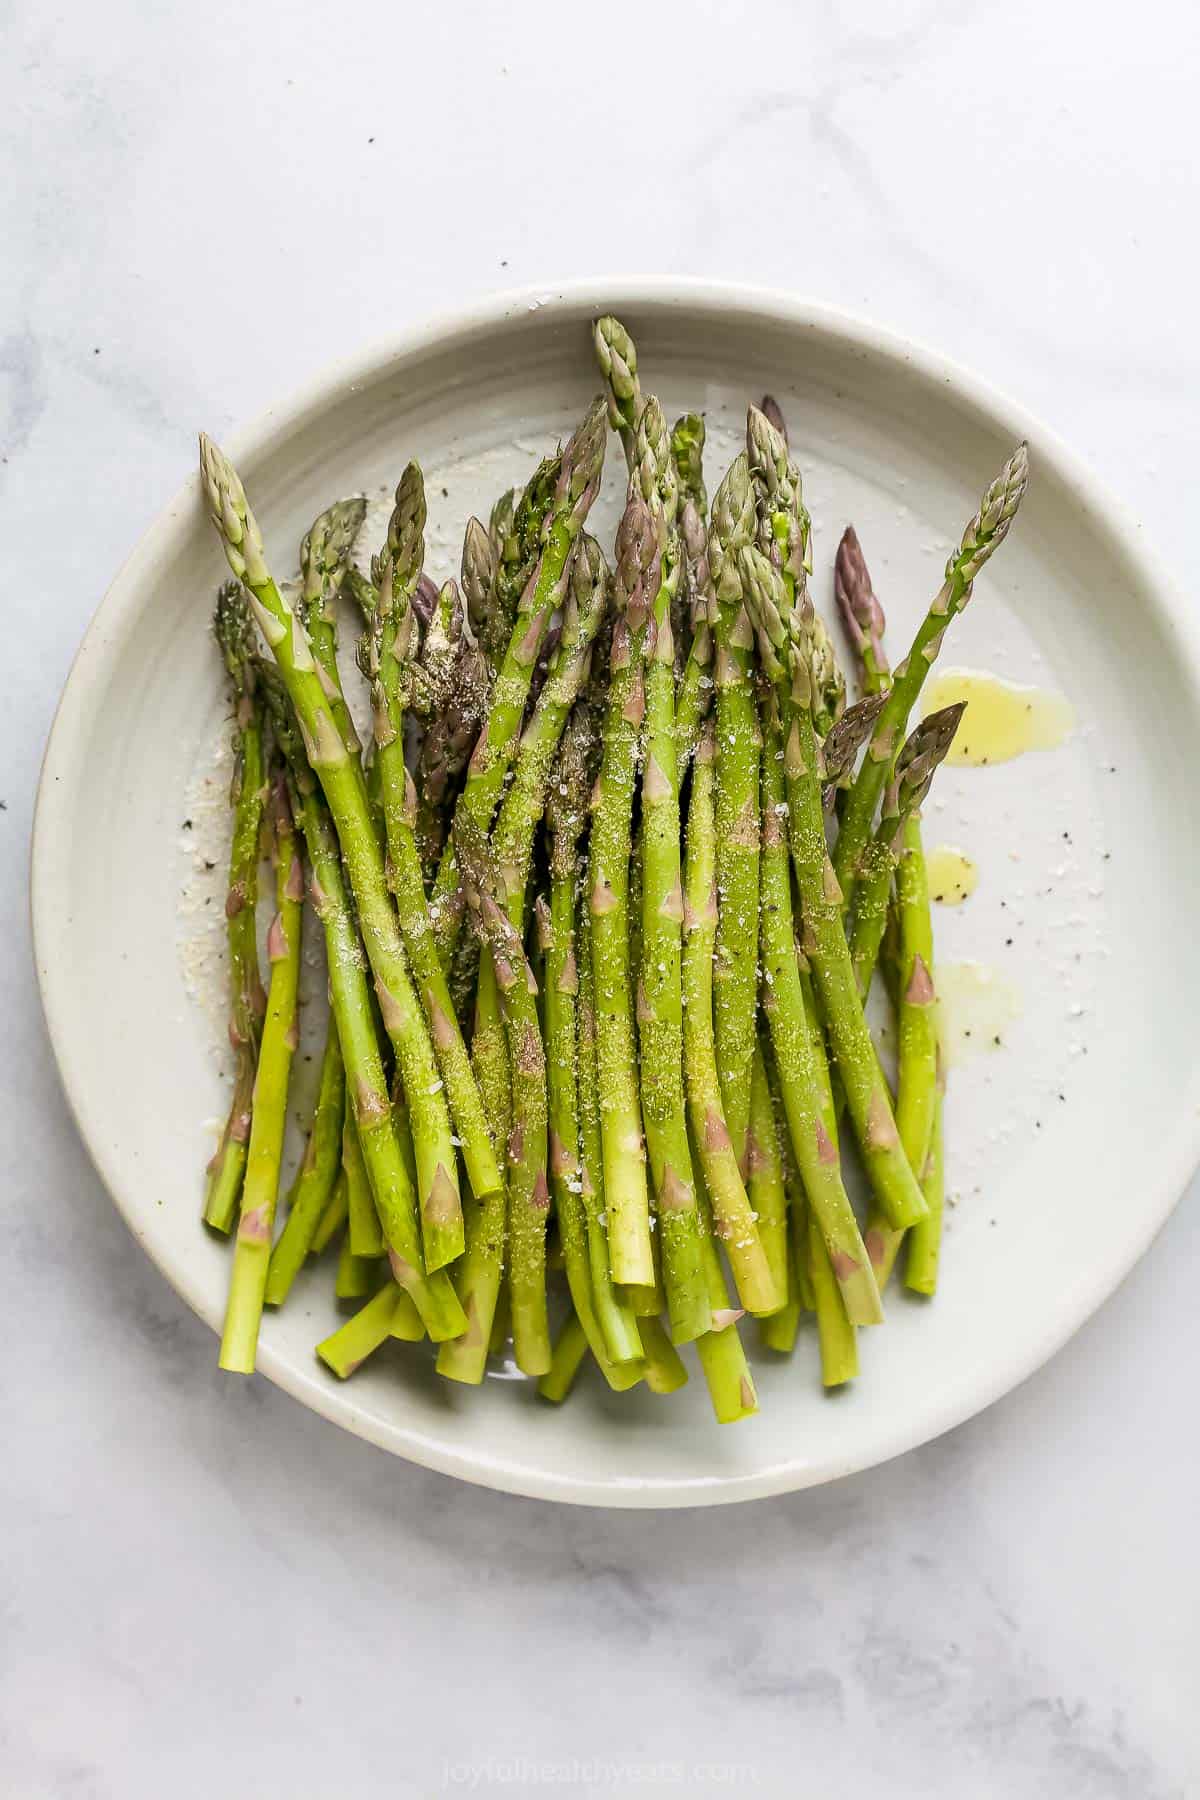 Raw asparagus stalks piled onto a plate with oil, garlic powder, salt and pepper sprinkled over them